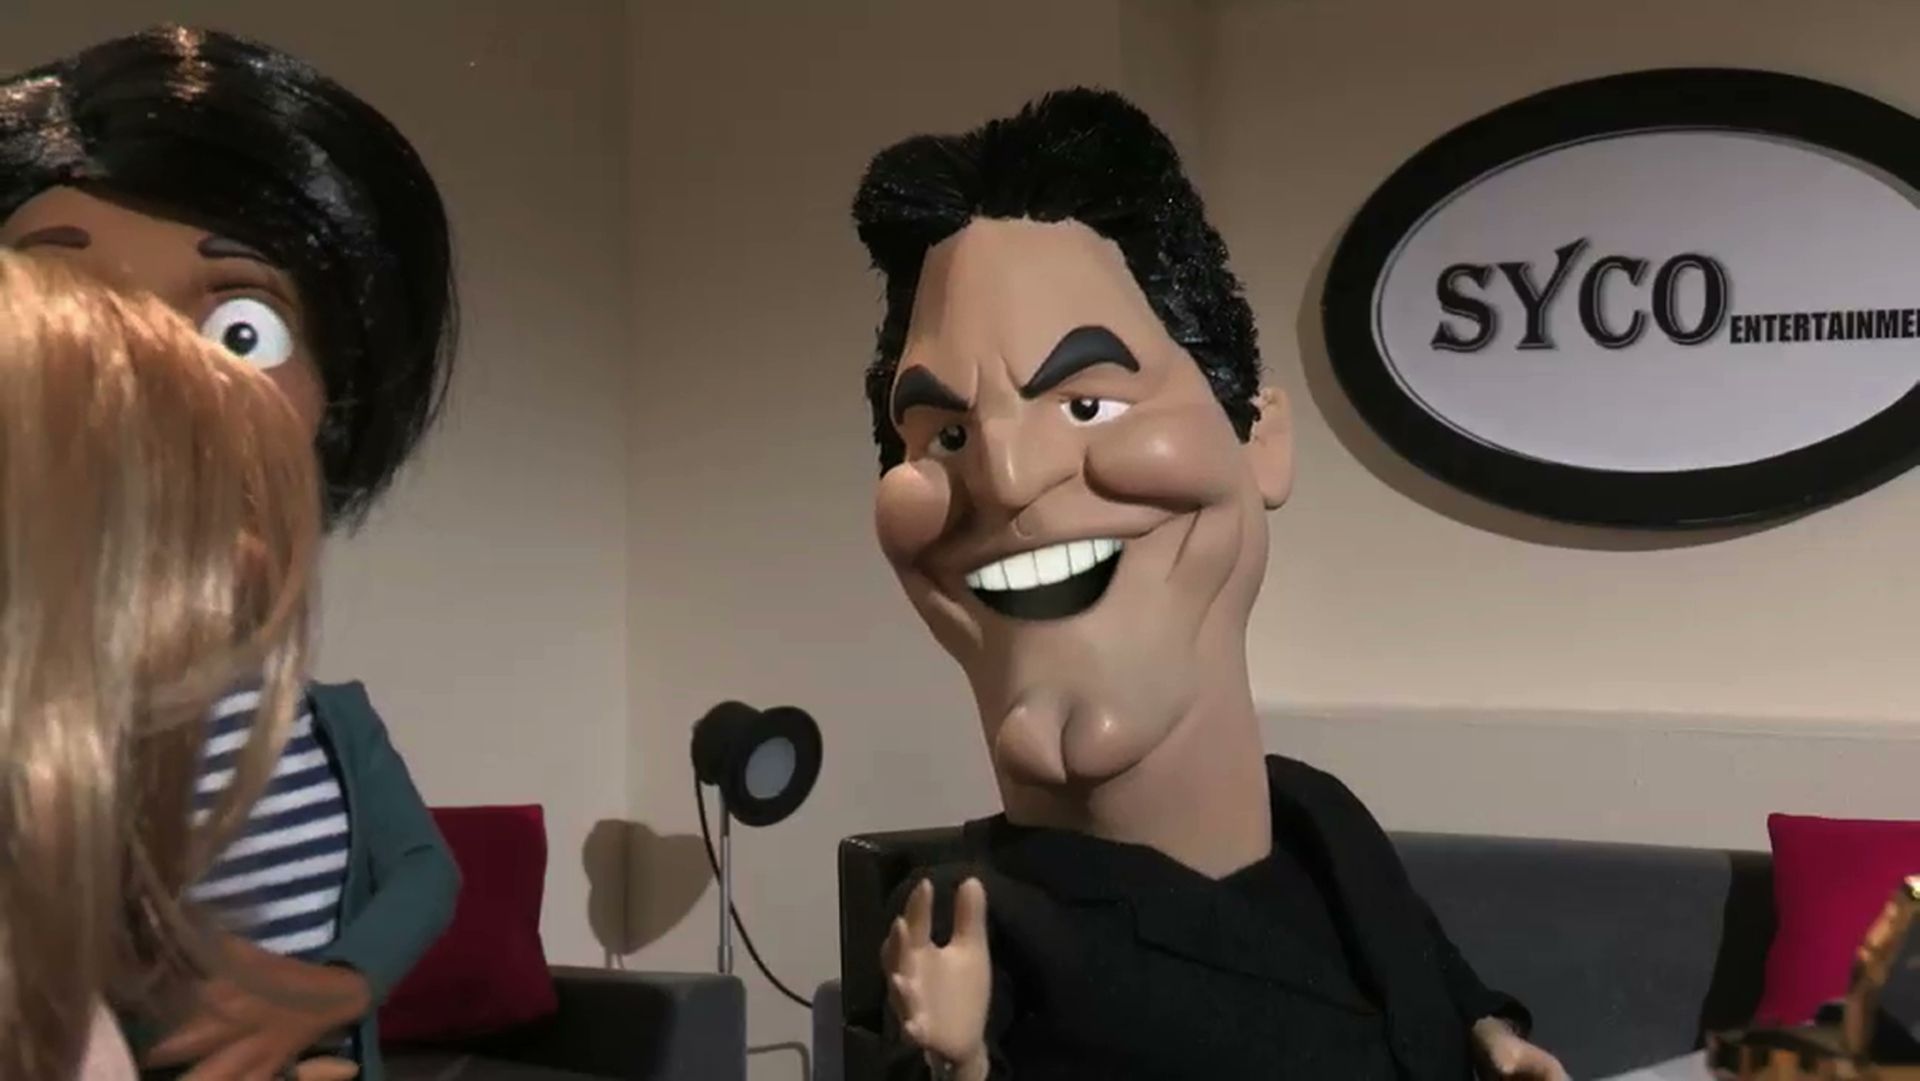 Newzoid puppet - Simon Cowell - Image 2 of 4